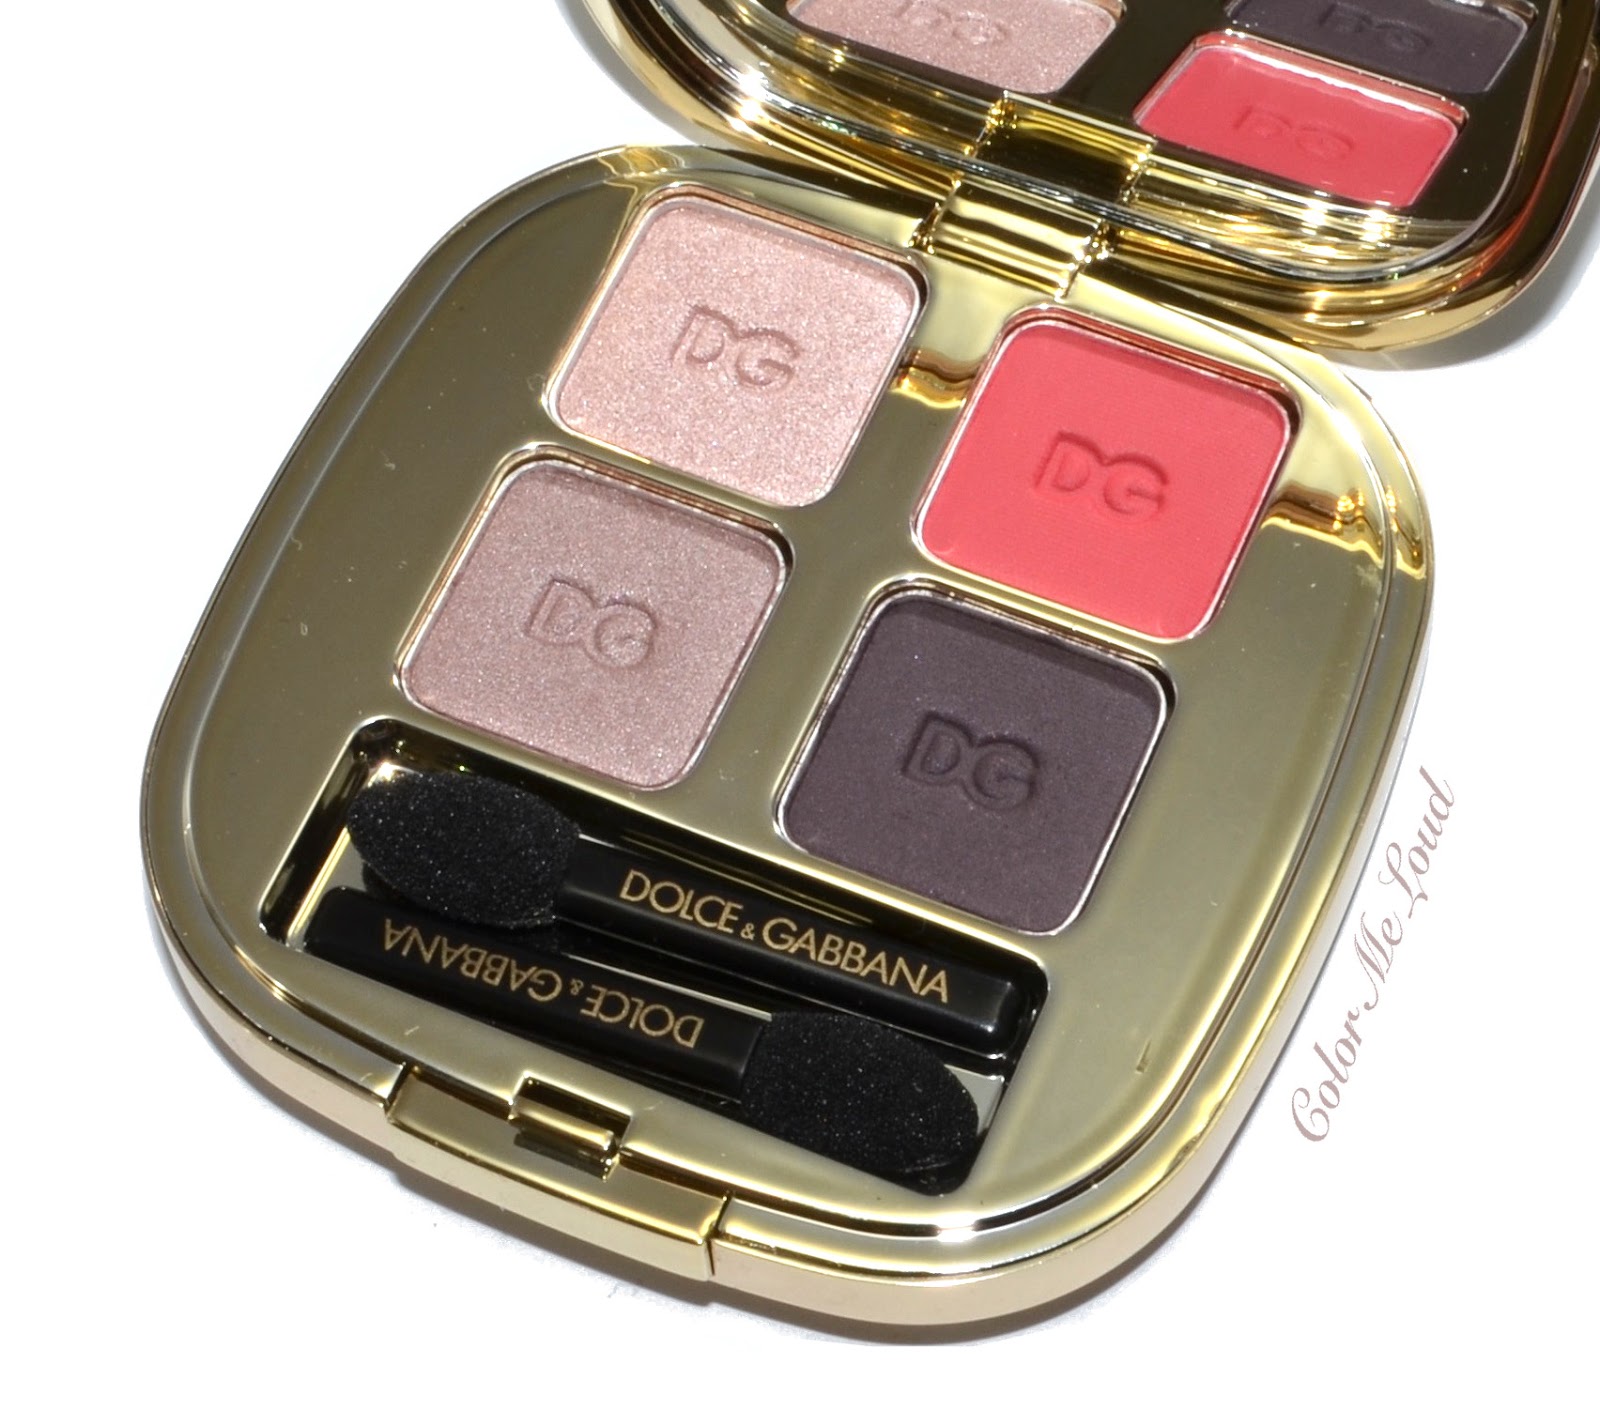 Dolce & Gabbana Smooth Eye Colour Quad #146 Lushies, Review, Swatch & FOTD  | Color Me Loud